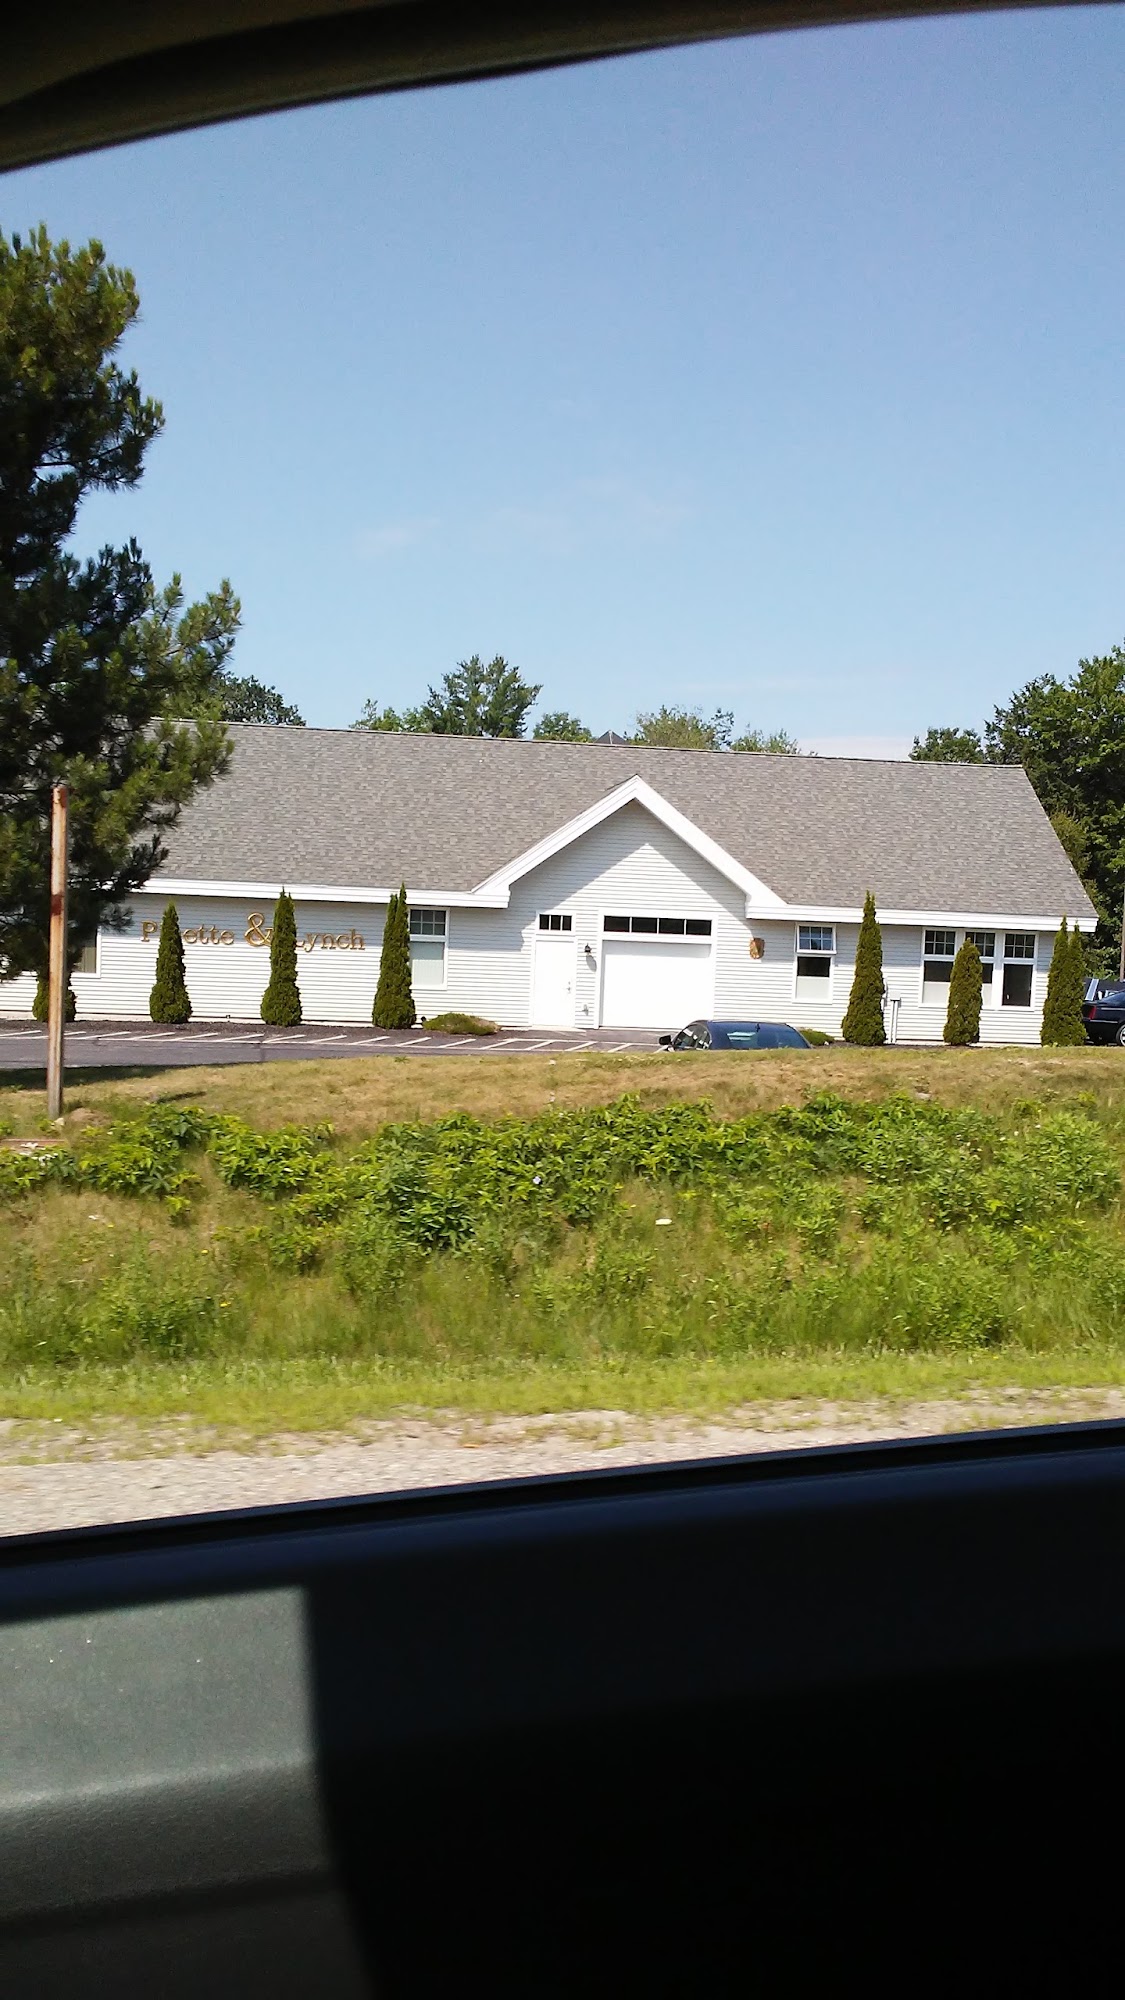 Pinette Dillingham & Lynch Funeral Home and Cremation Services